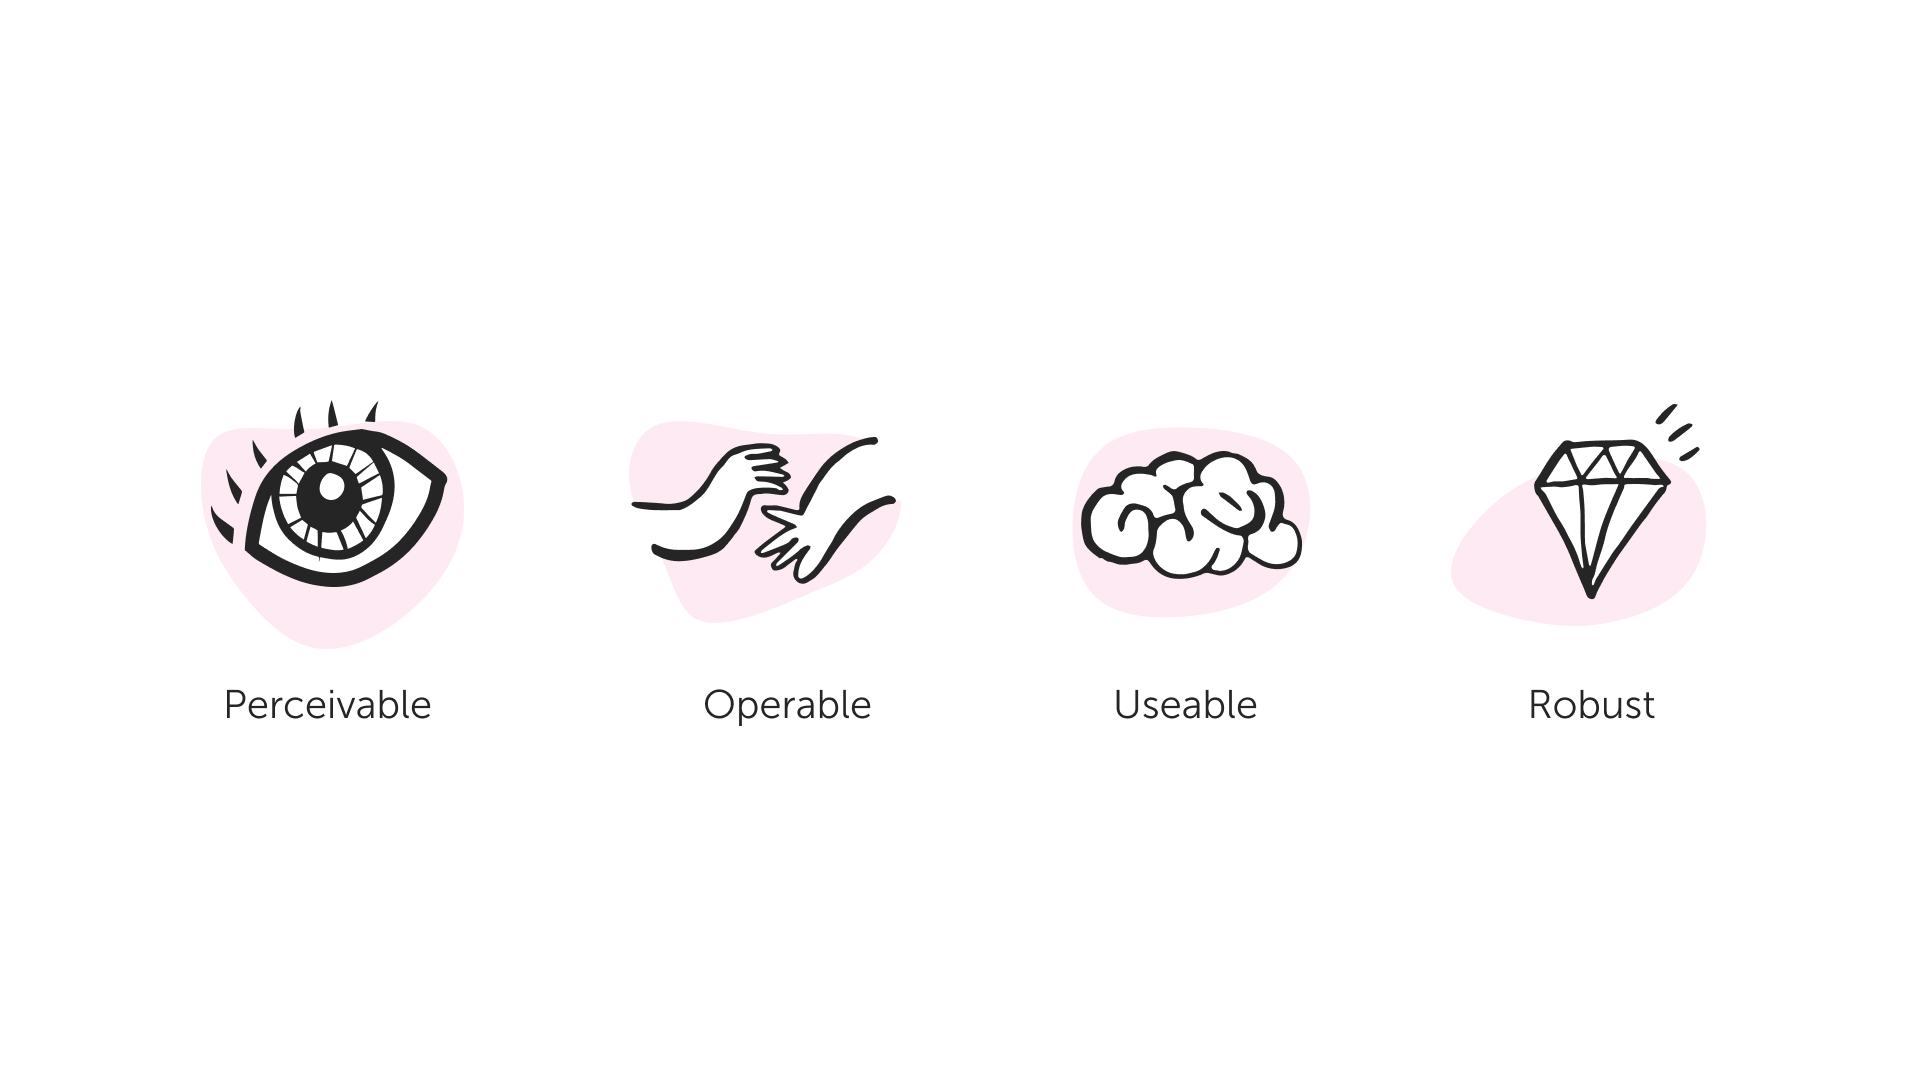 Four icons, each within a light pink circle and accompanied by a word that represents a principle of accessible design. From left to right. Perceivable is represented by a stylised eye, indicating the need for information to be presented in ways that users can perceive. Operable is depicted by two hands, one with a pointing index finger and the other open, suggesting interactions that users can perform. Useable is illustrated with a cloud of thought, symbolising the importance of user-friendly interfaces that can be understood and used by people. Robust is shown with a diamond, representing durable and resilient systems that can be reliably interpreted by a wide variety of user agents, including assistive technologies.